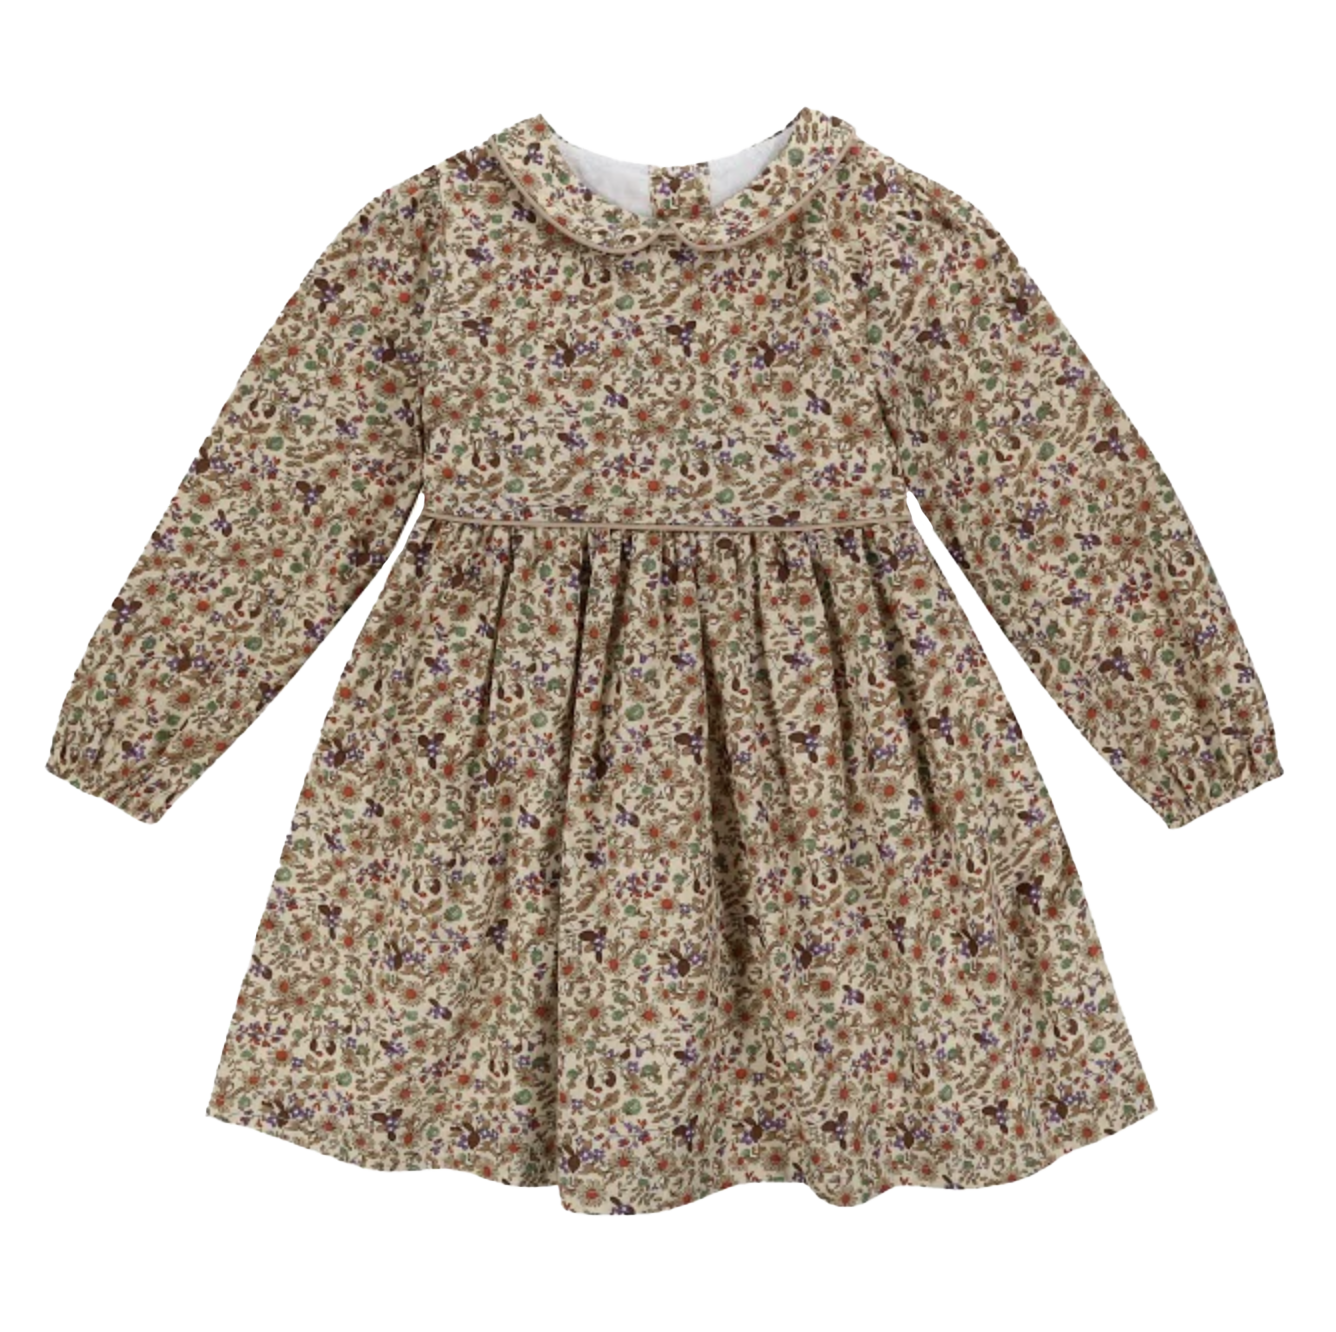 [3/4y] Little Cotton Clothes Dorothy Dress in Autumn Floral